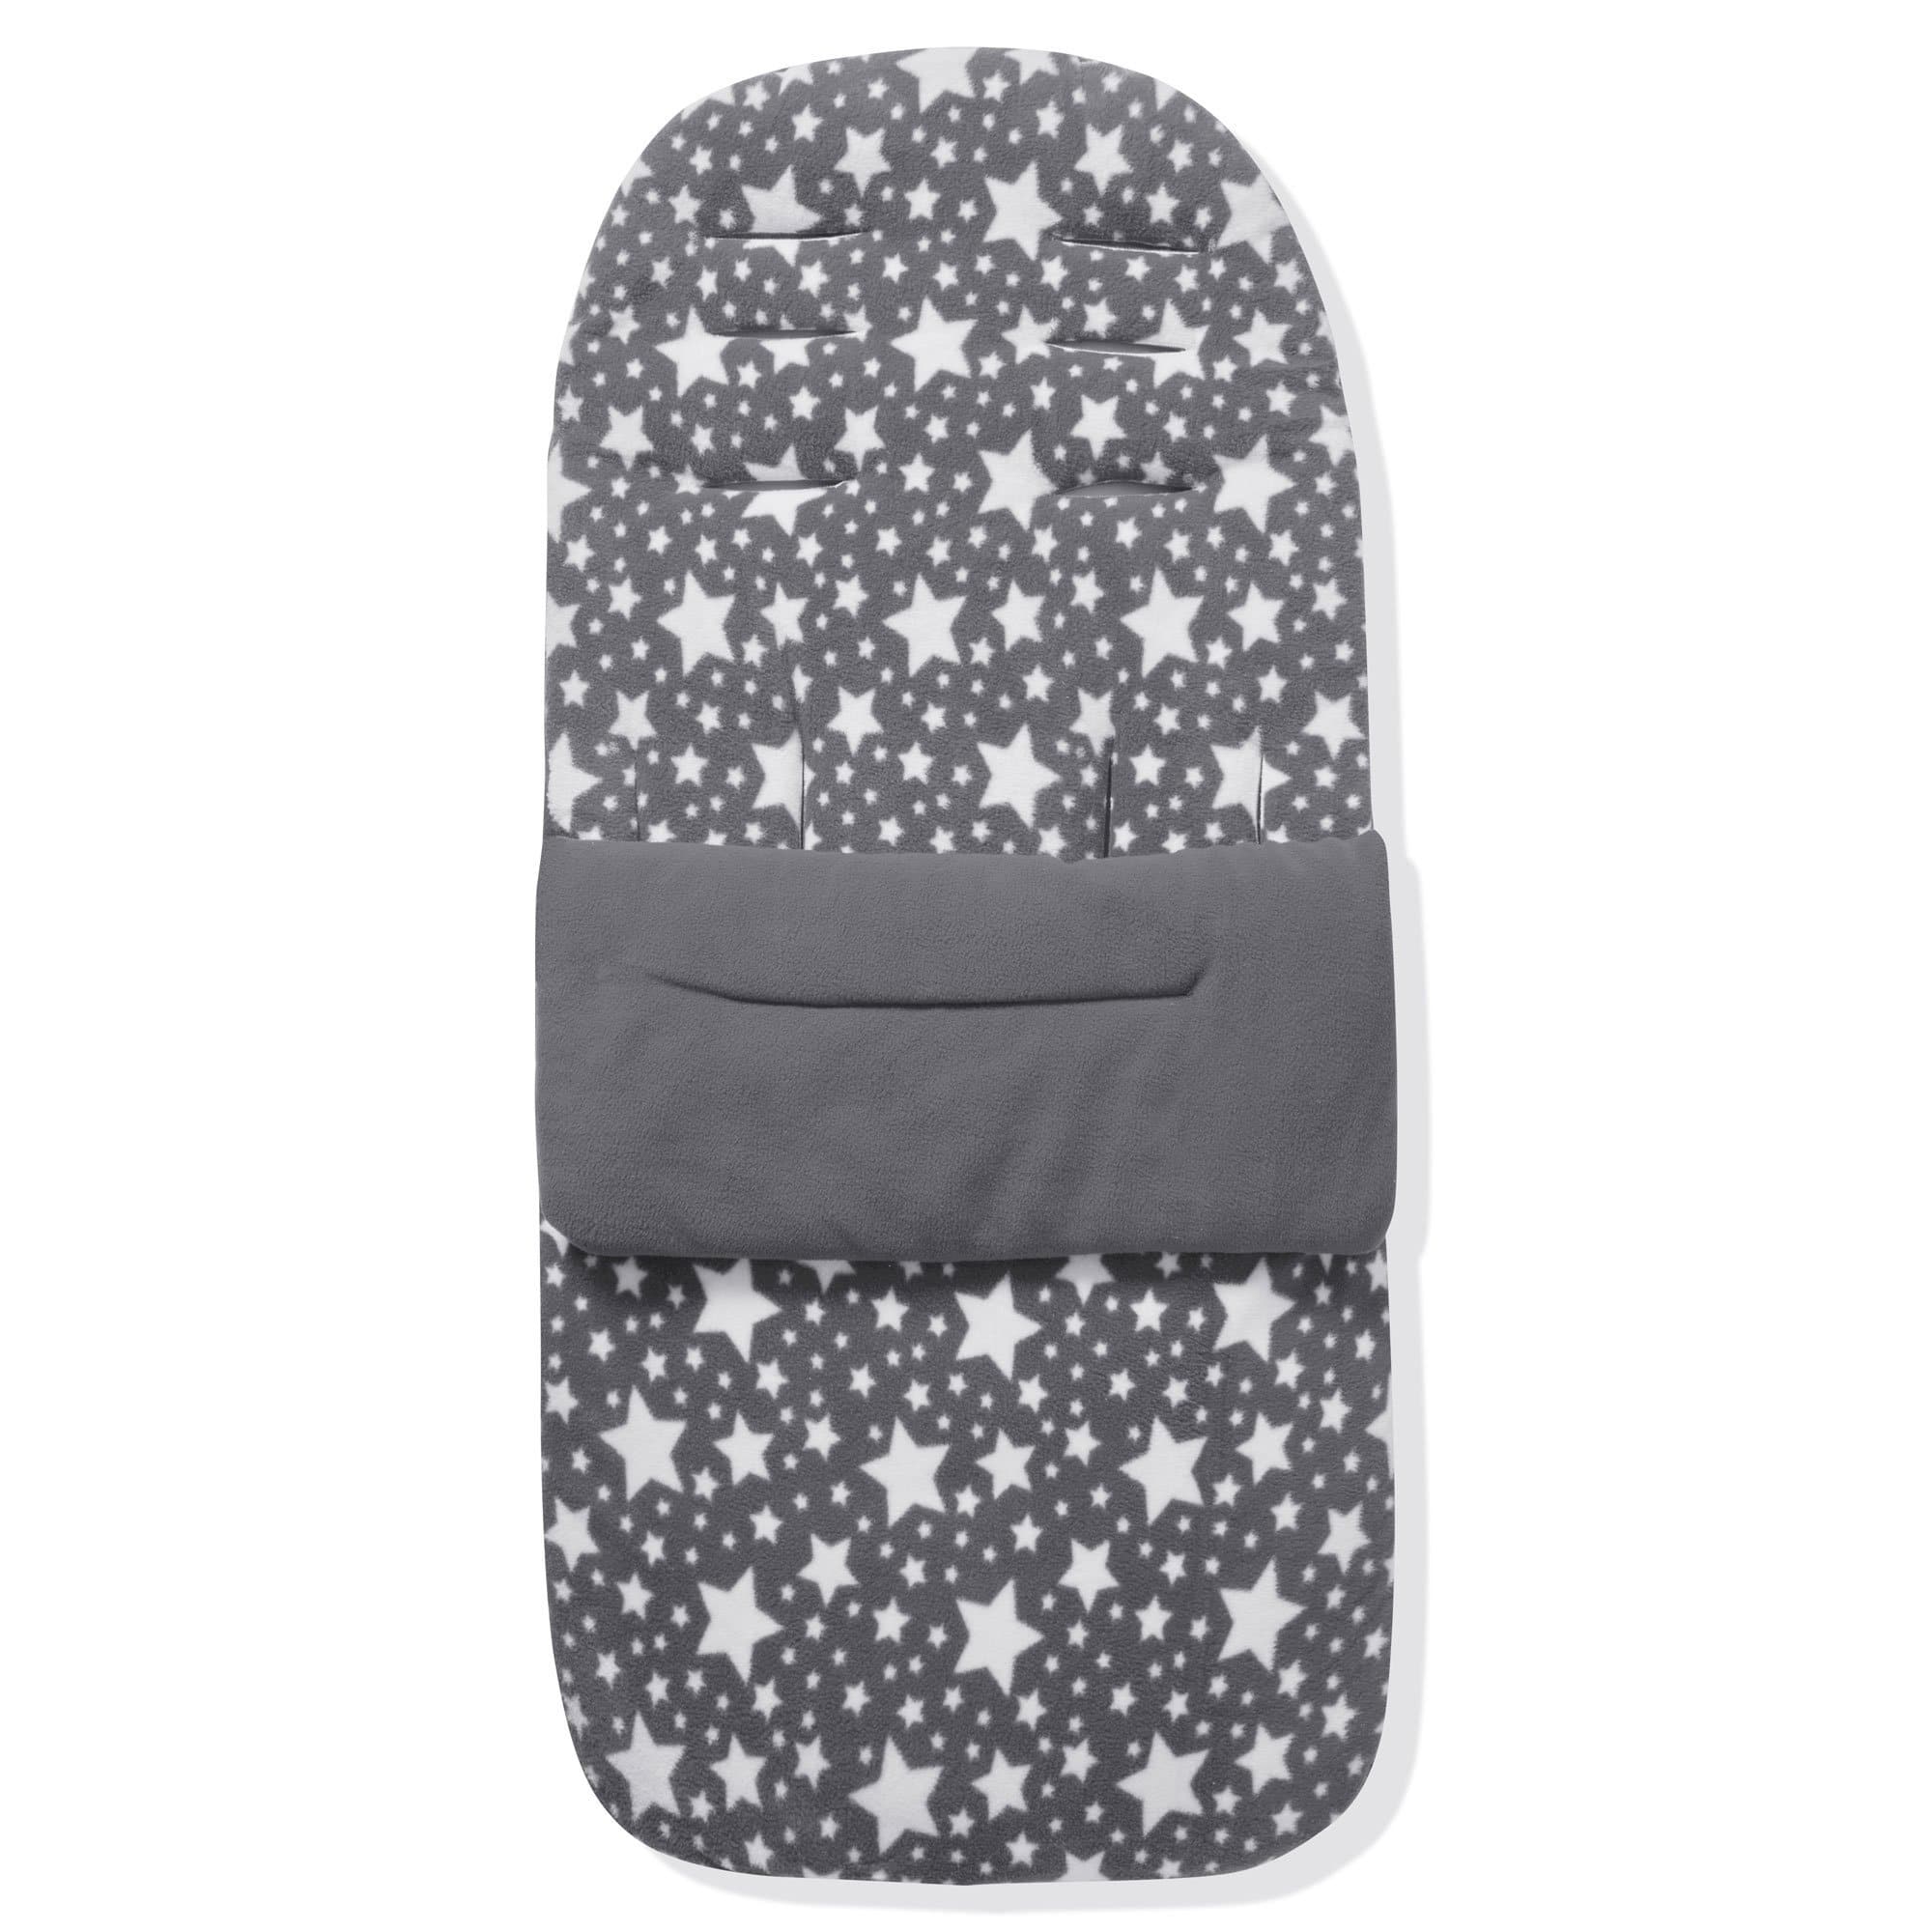 Fleece Footmuff / Cosy Toes Compatible with BabySun - Grey Star / Fits All Models | For Your Little One